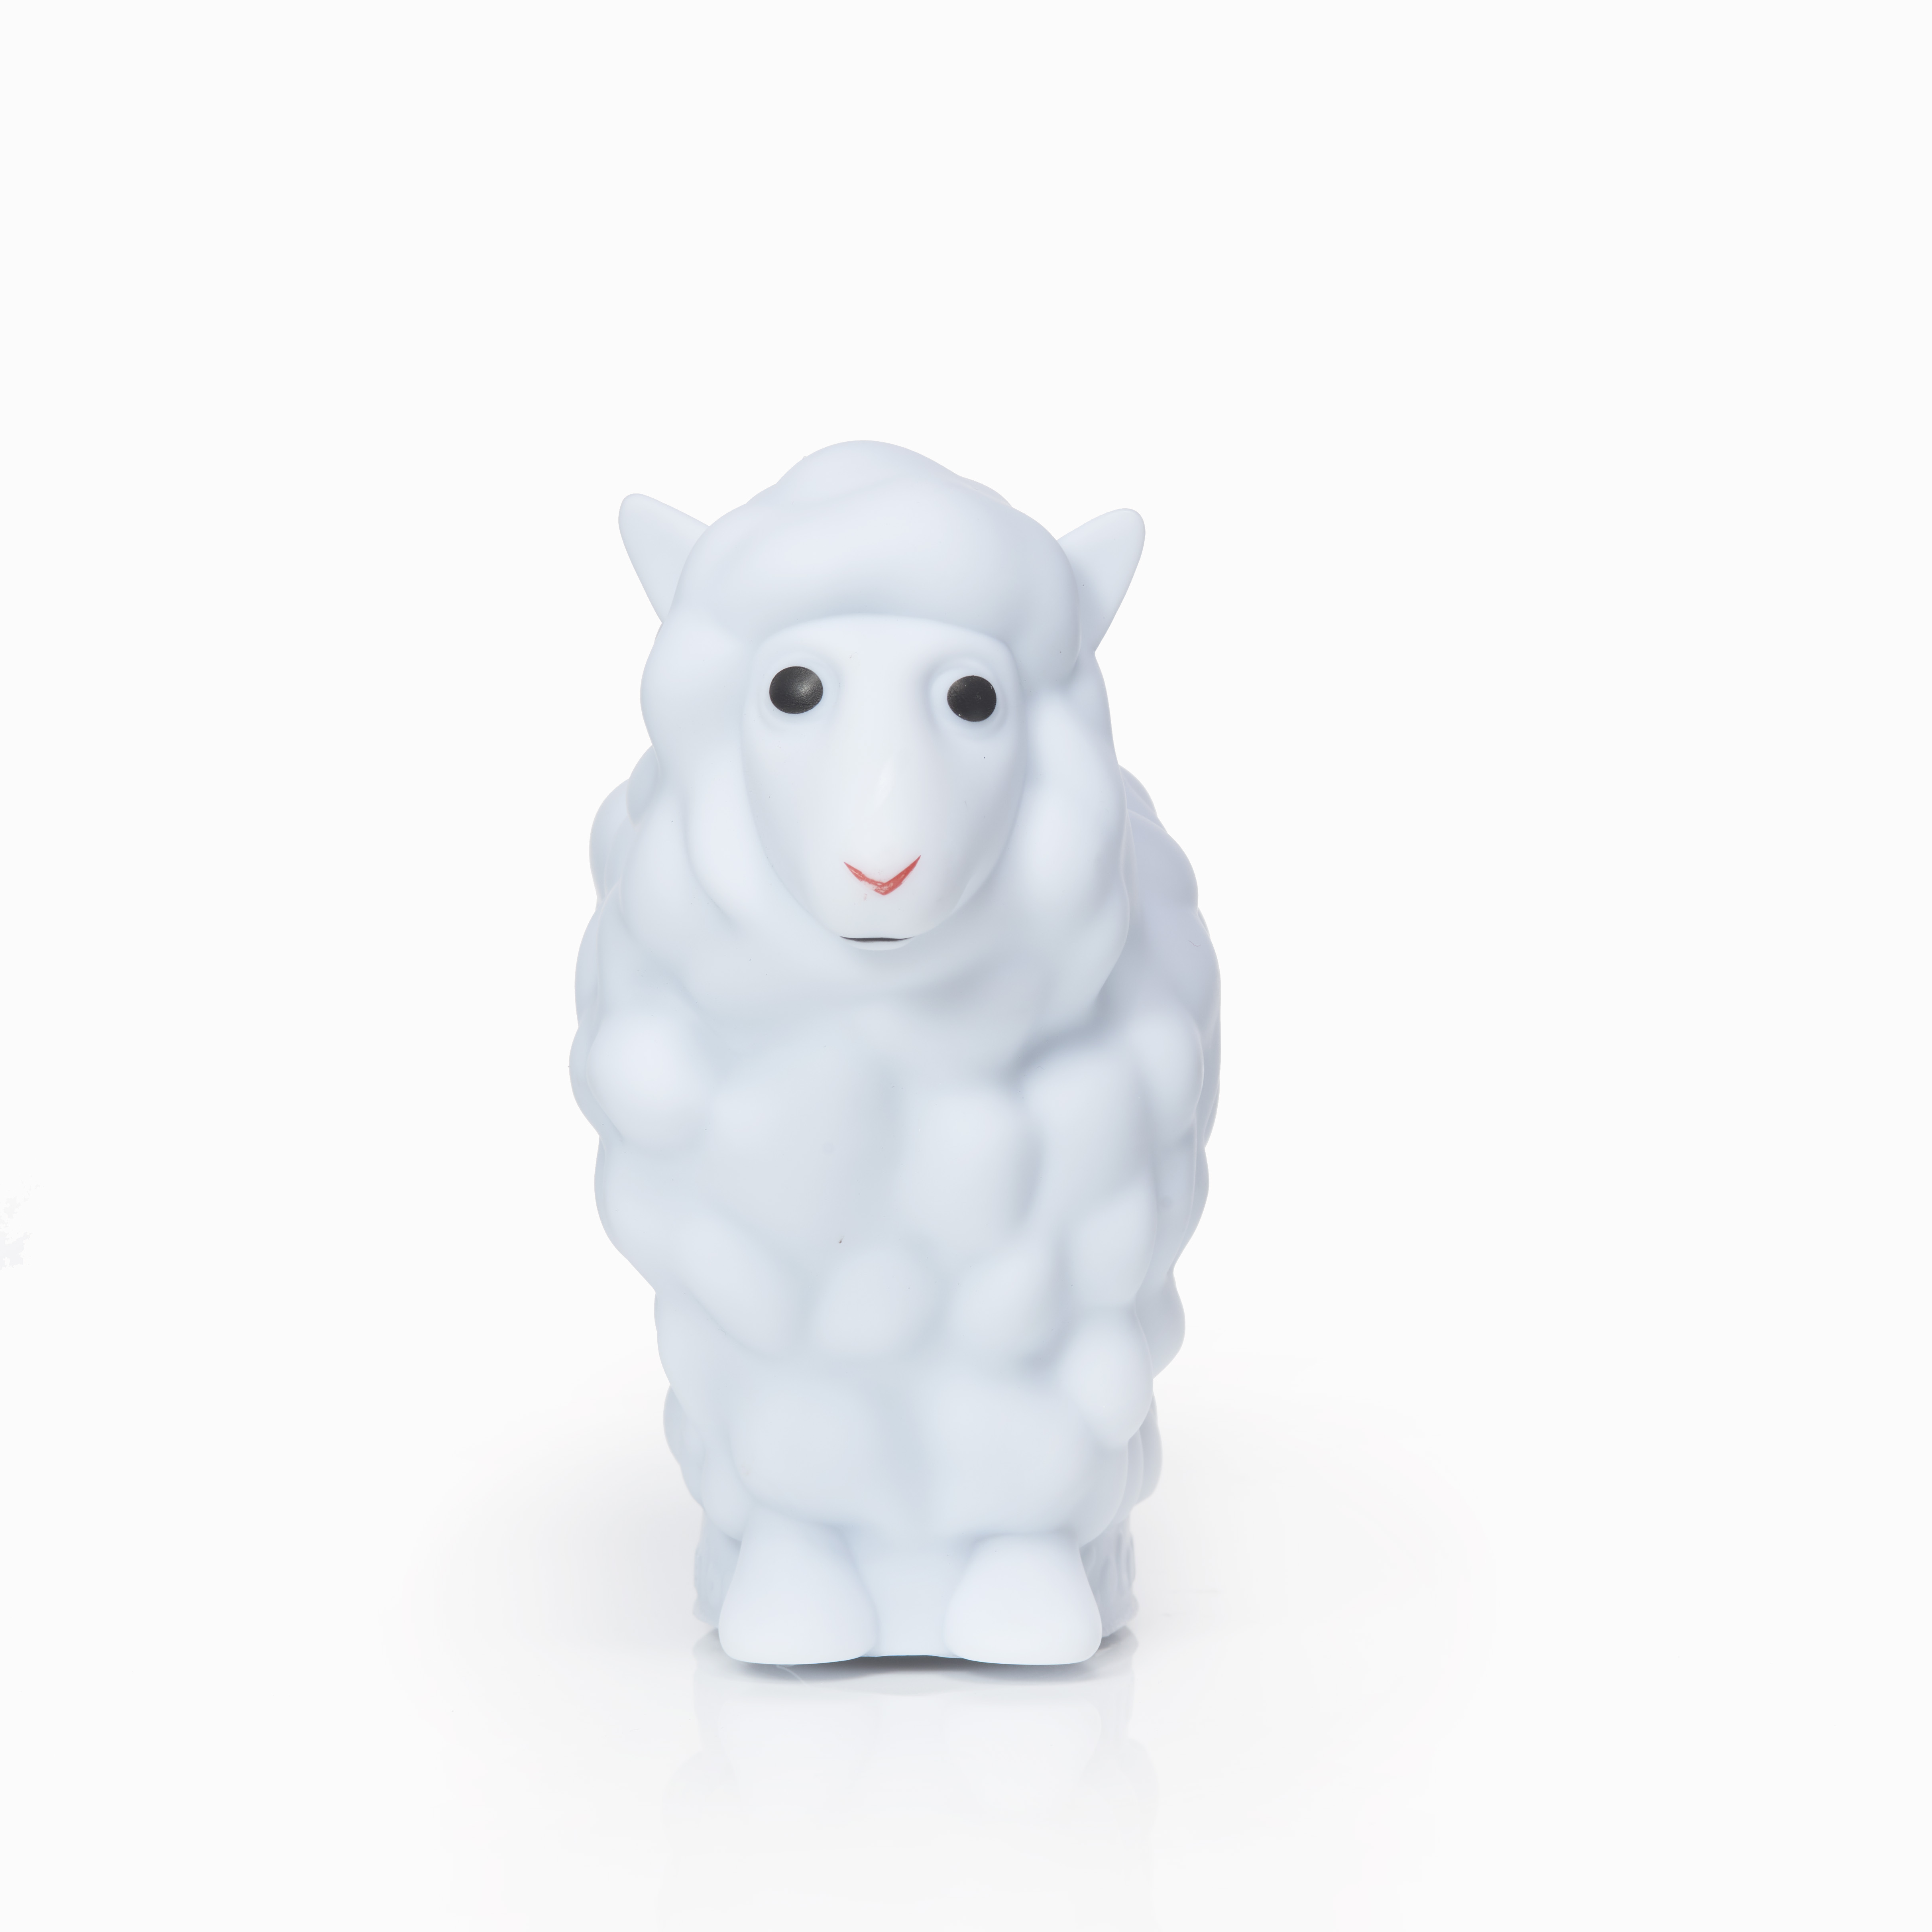 Musical CoComelon Sheep Changes to Match ColoursPlays Nursery 